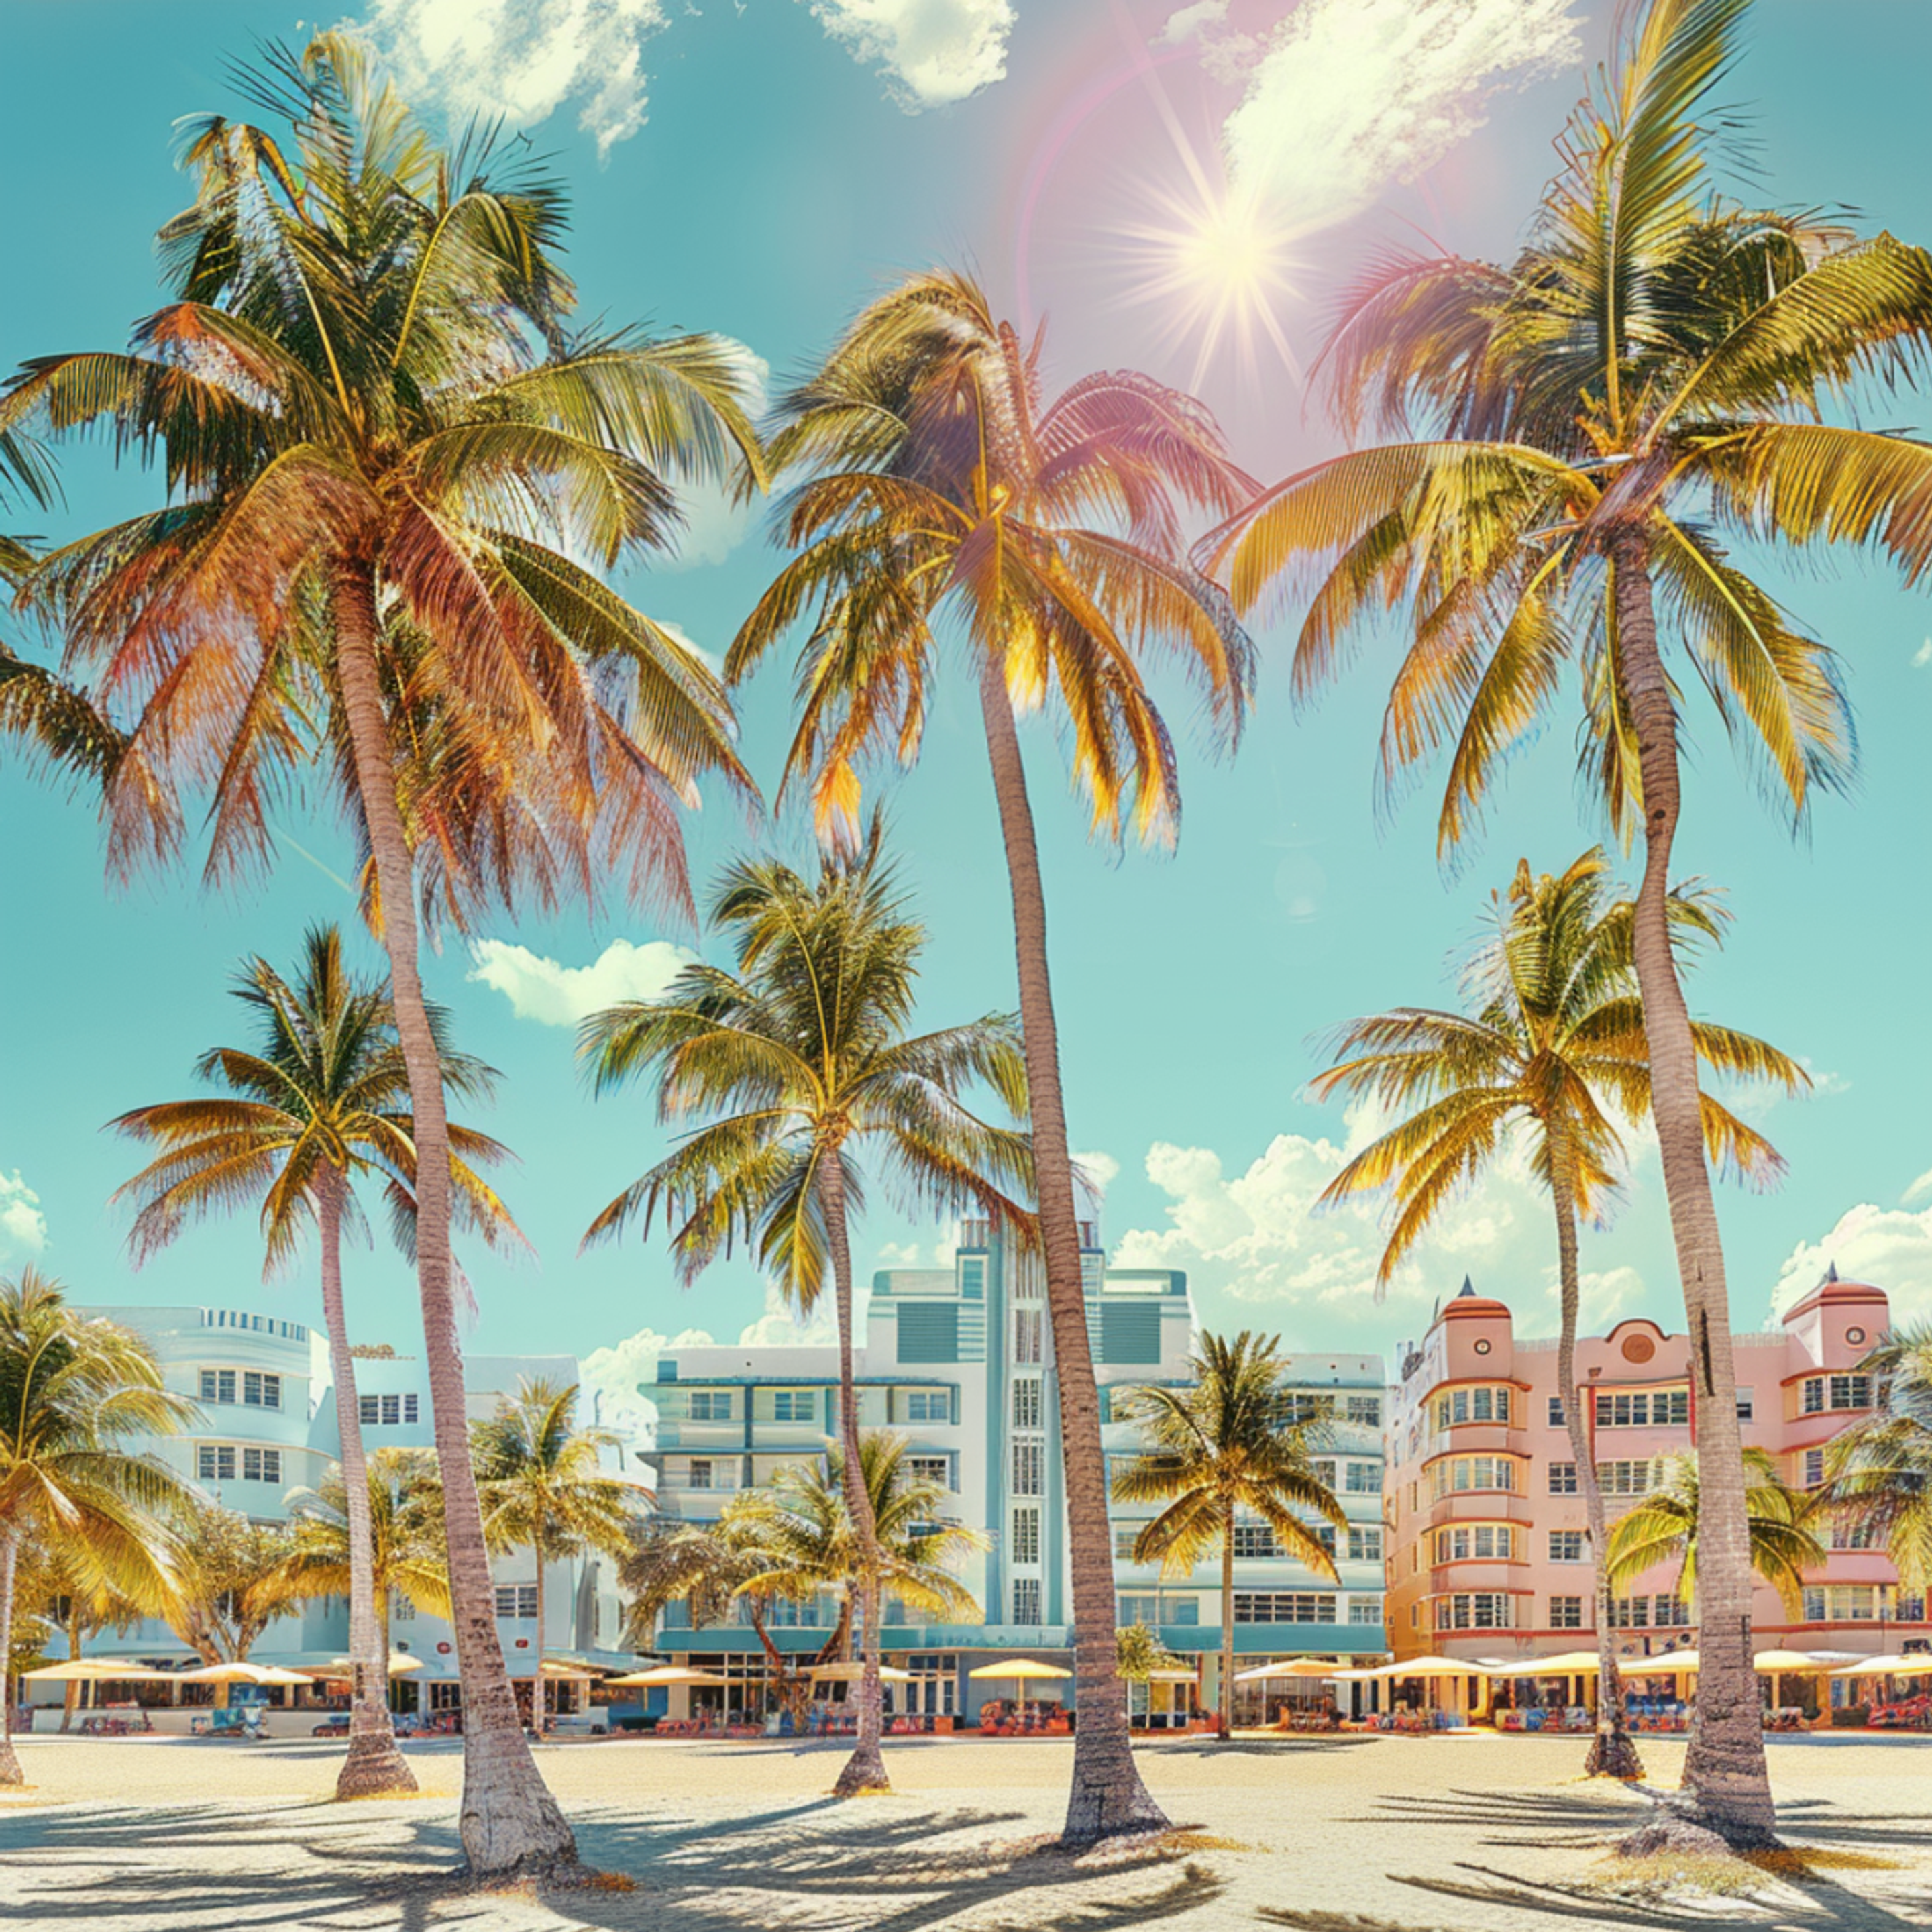 Sun-drenched palm trees sway along Miami Beach with iconic Art Deco buildings in the background, epitomizing the tropical allure and vibrant architectural heritage of Miami, Florida.